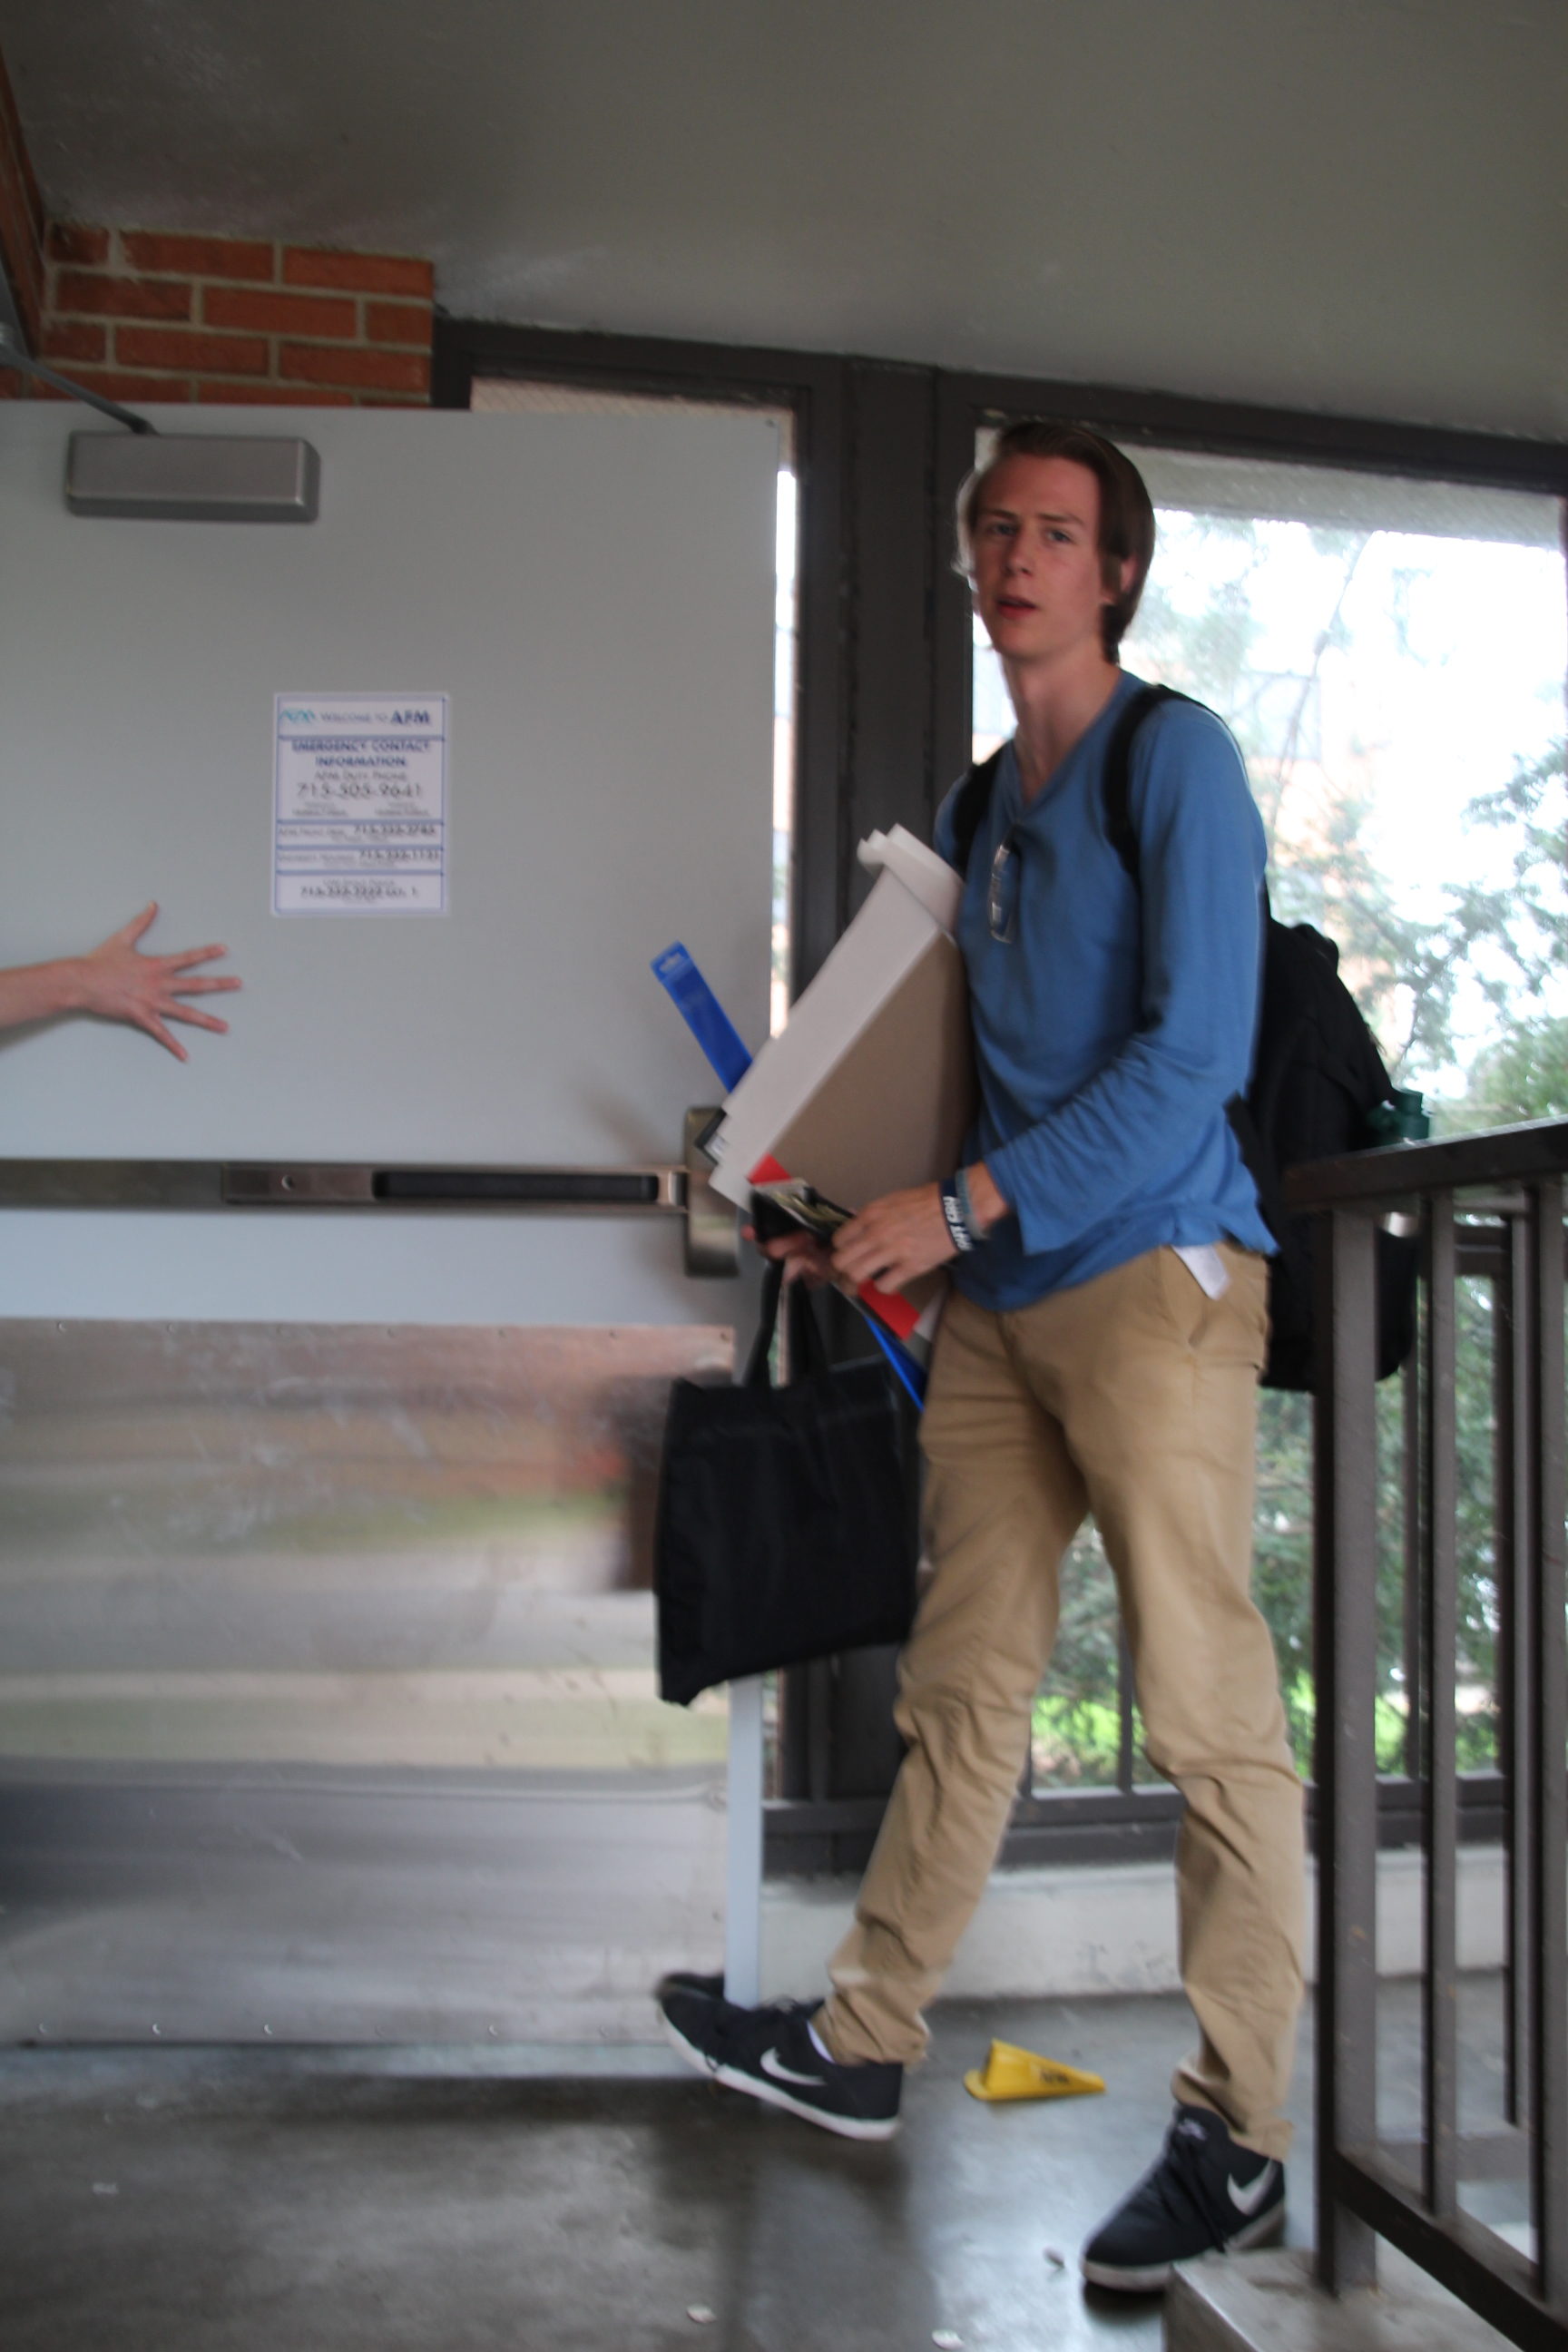 After using his card to gain access to AF, Sam Gersregen, a sophomore in the Graphics Design program, holds the door for his friends.